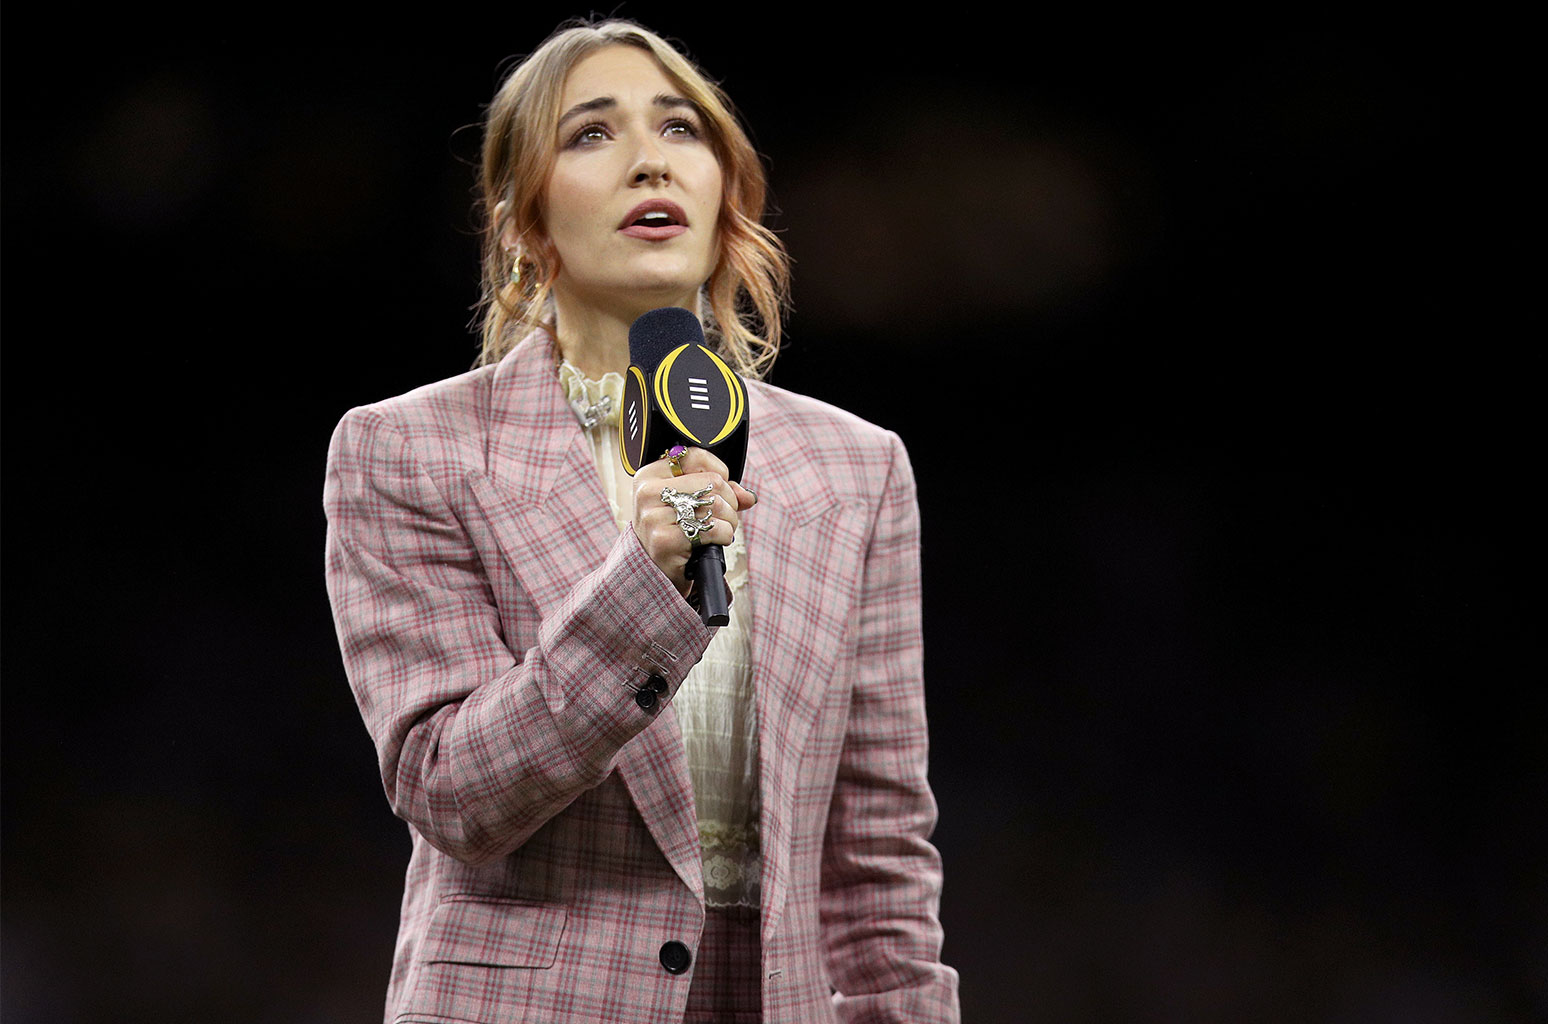 Watch Lauren Daigle's Moving National Anthem Performance at the College Football National Playoff